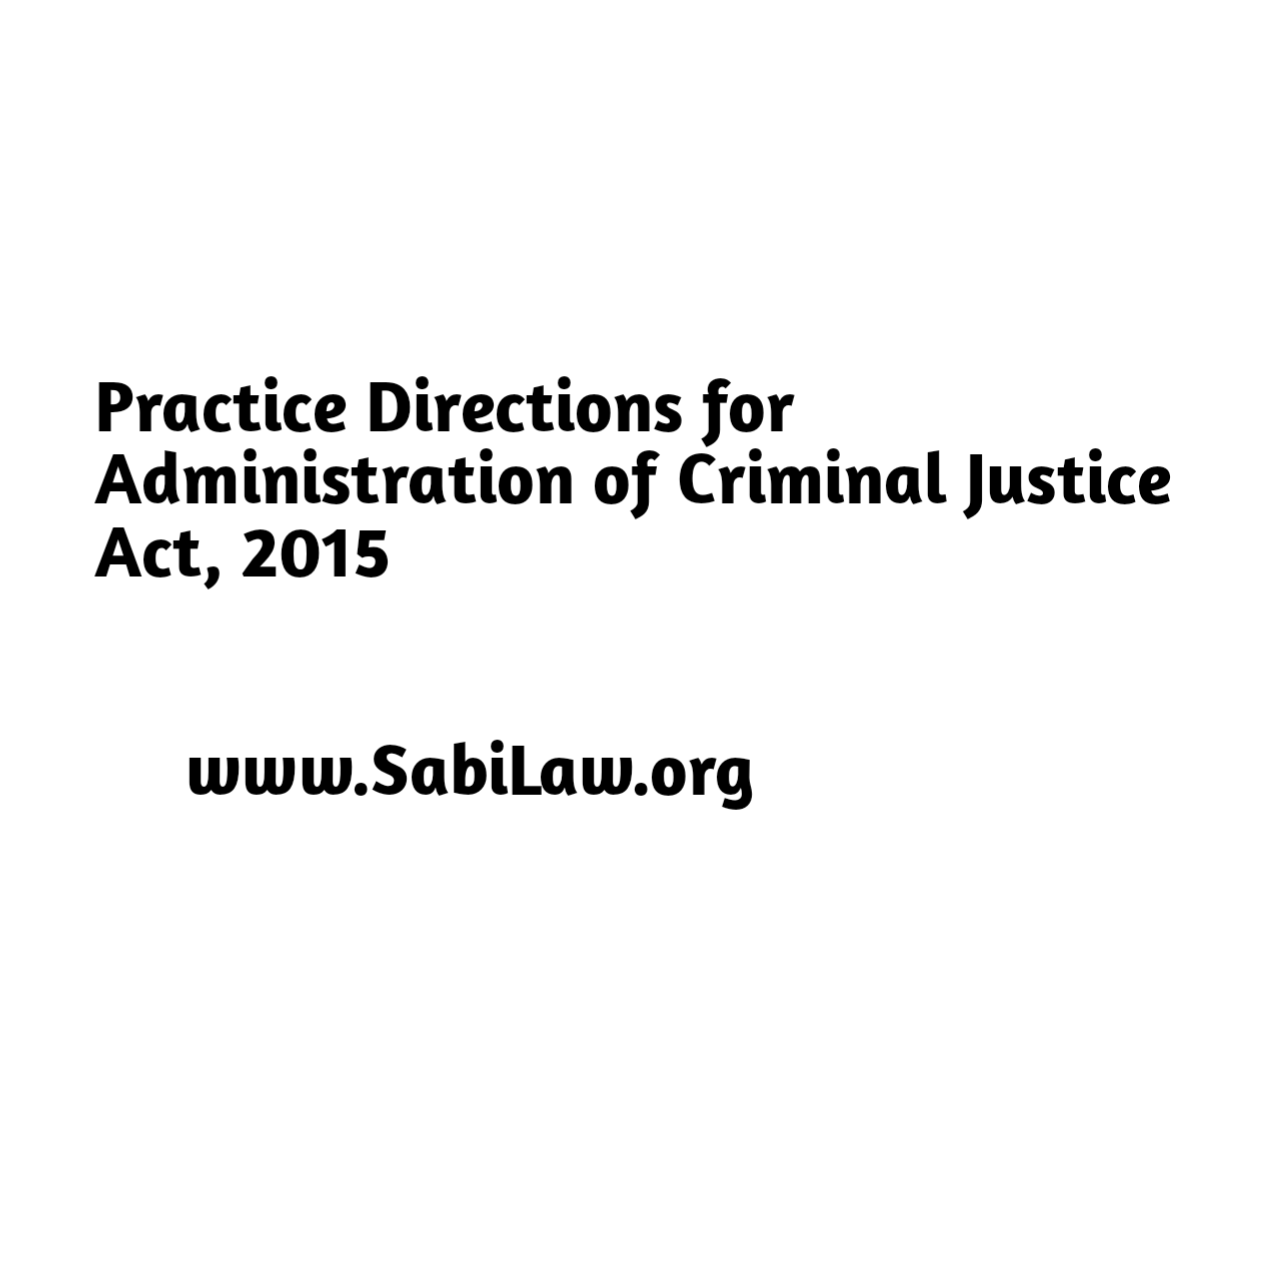 Click to download the Practice Directions for Administration of Criminal Justice Act, 2015